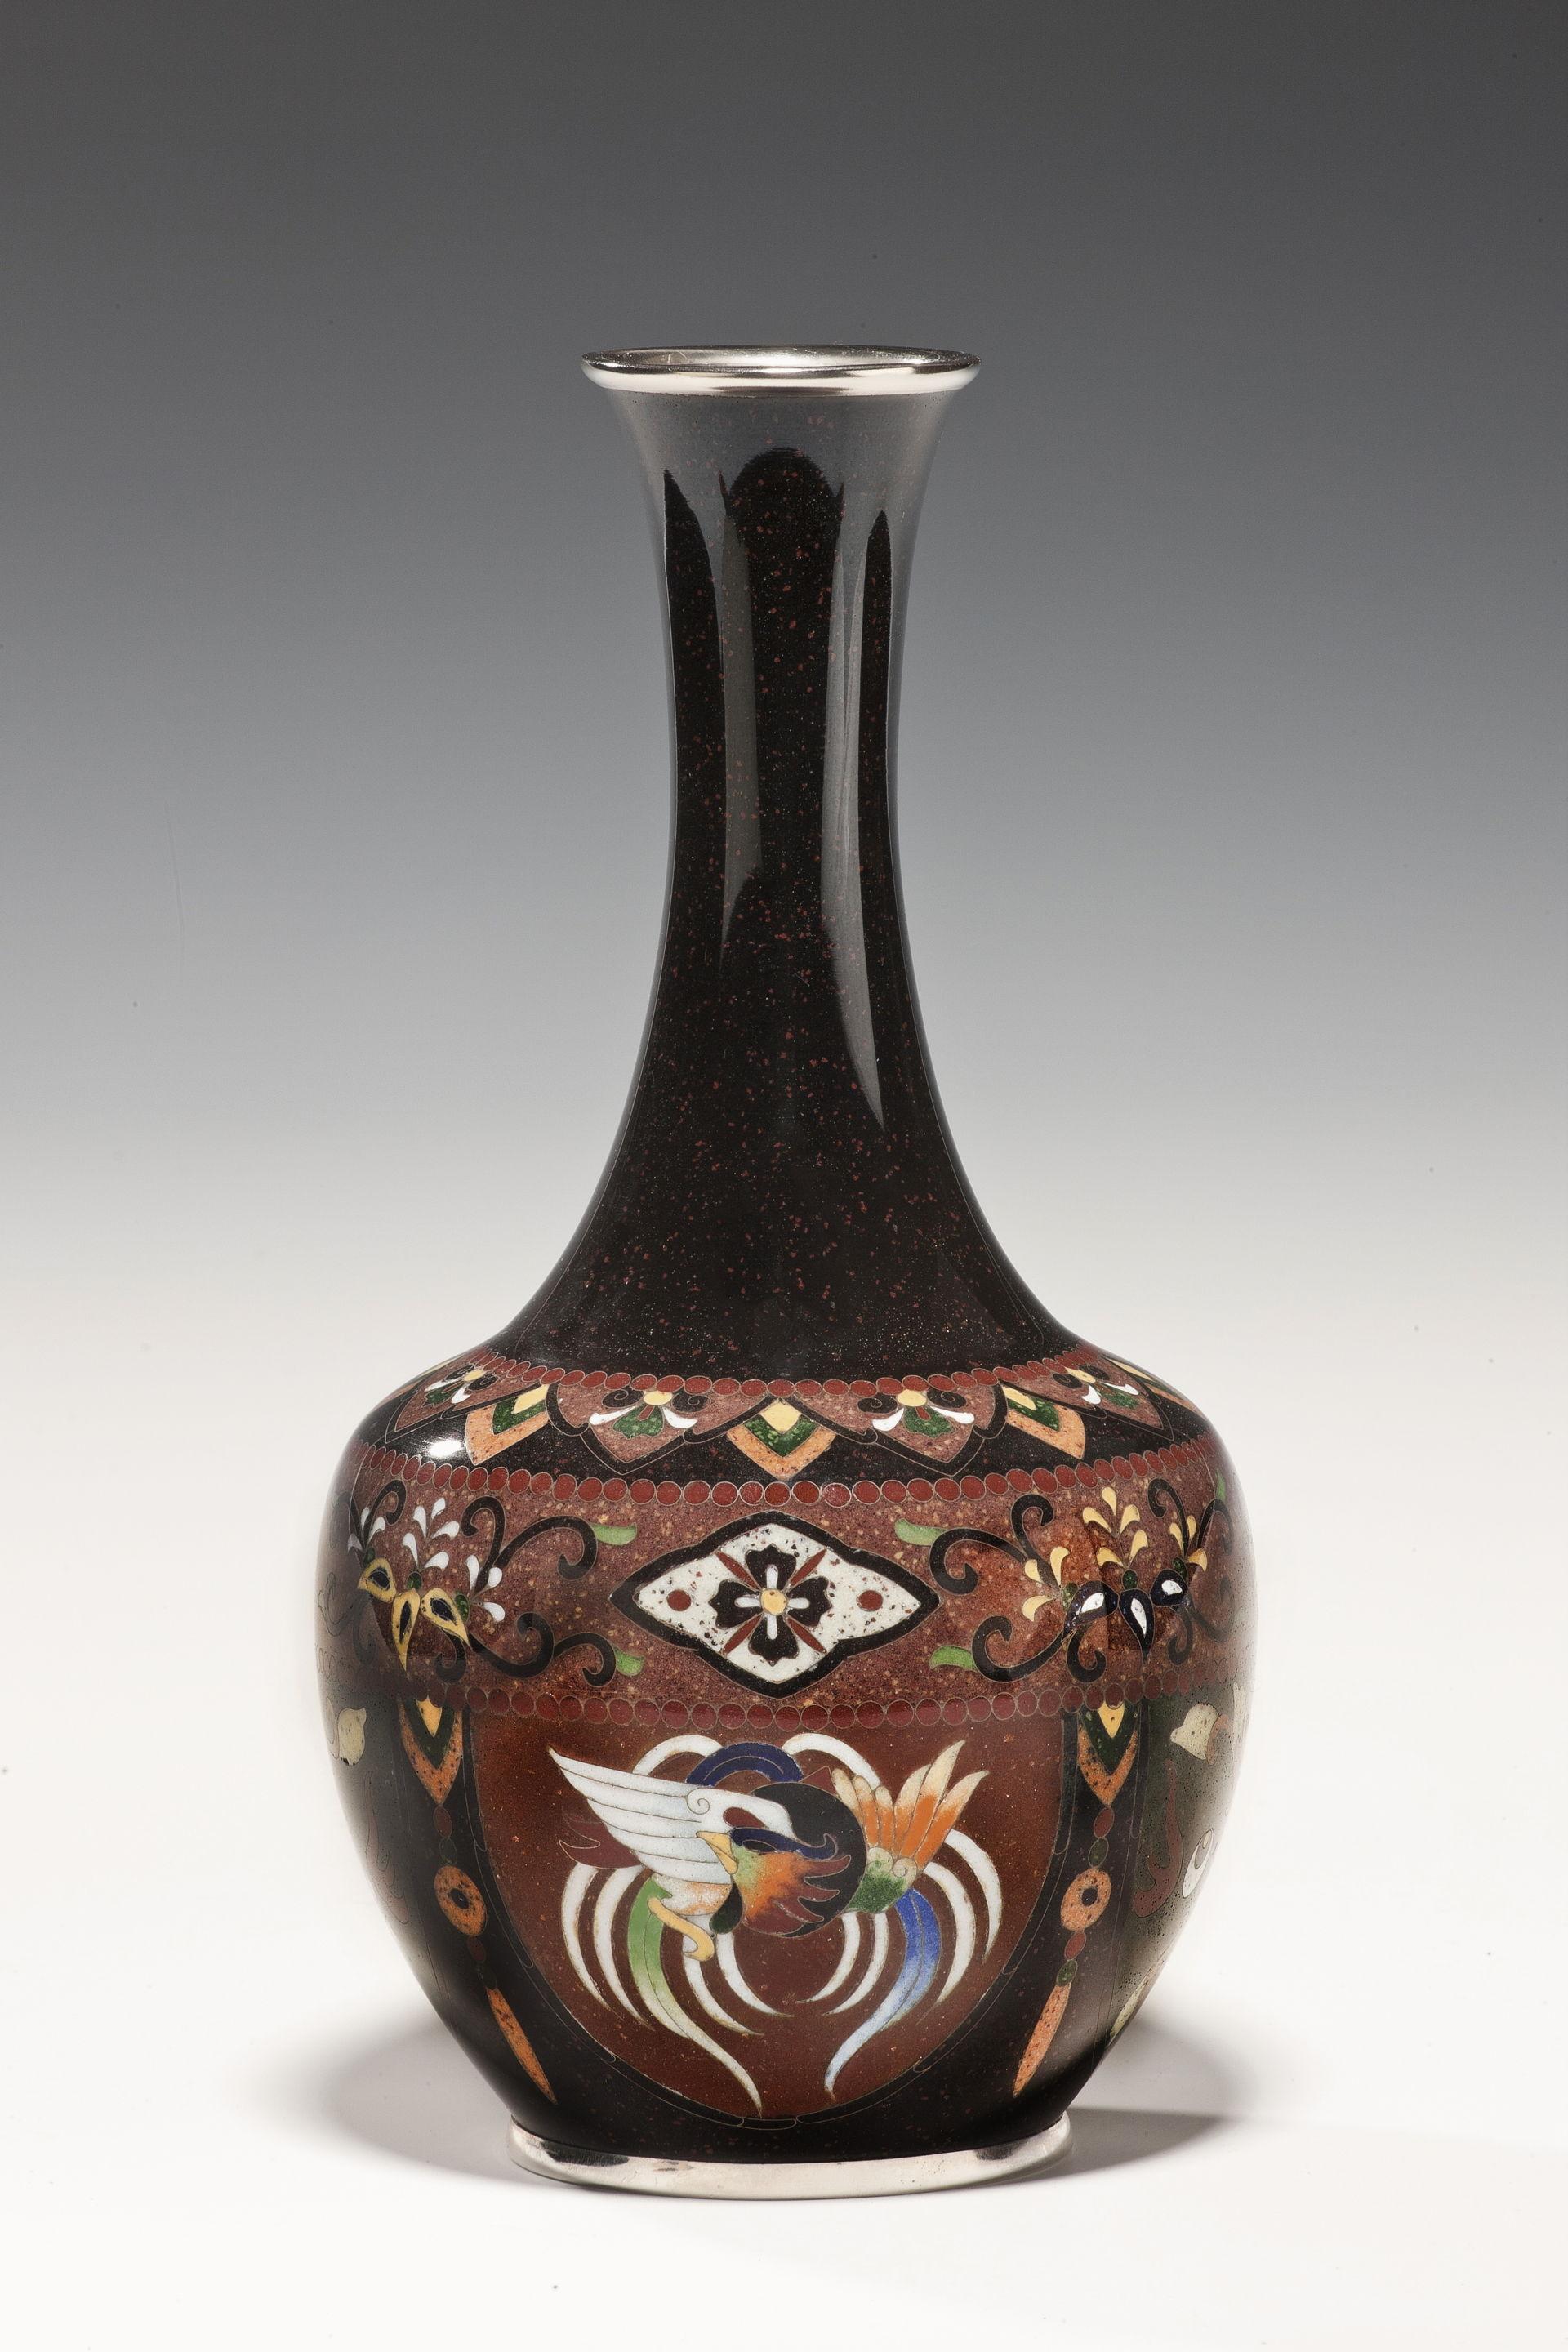 This bottle vase has lappets of ho-o birds on a ‘gold-stone’ ground, chrome mounts, 20th century.